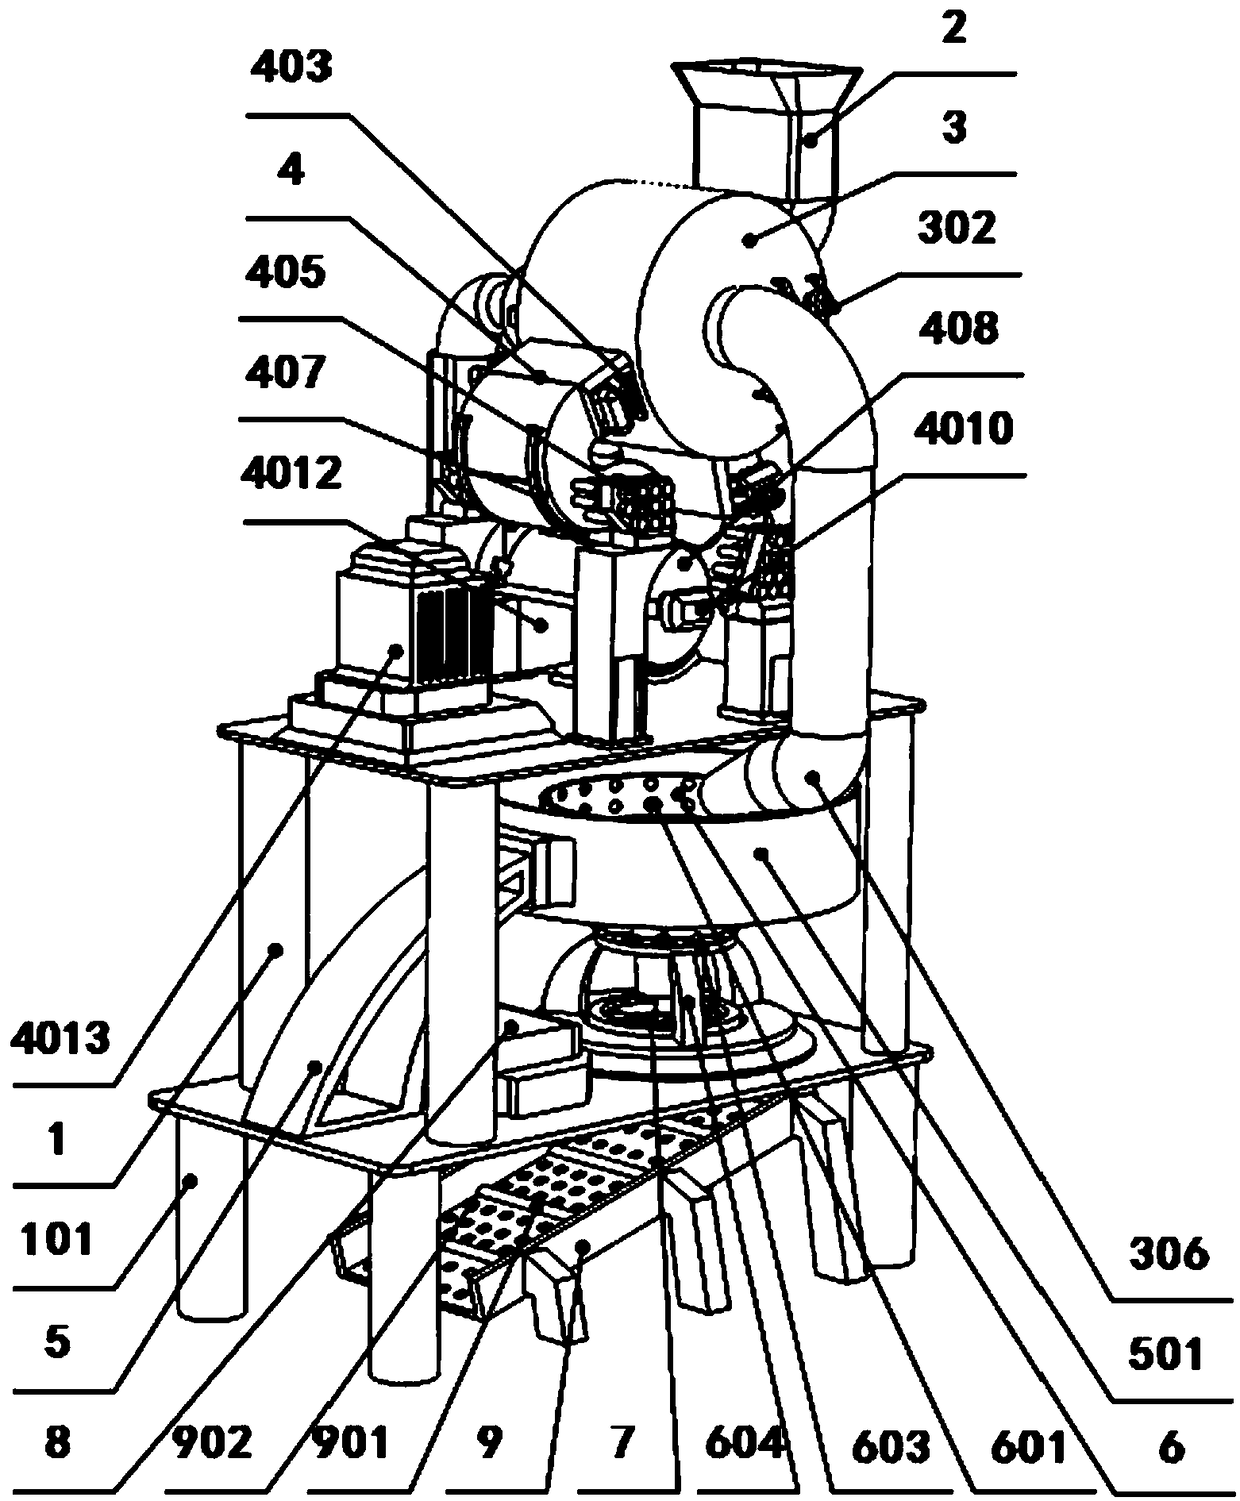 Ore dressing device